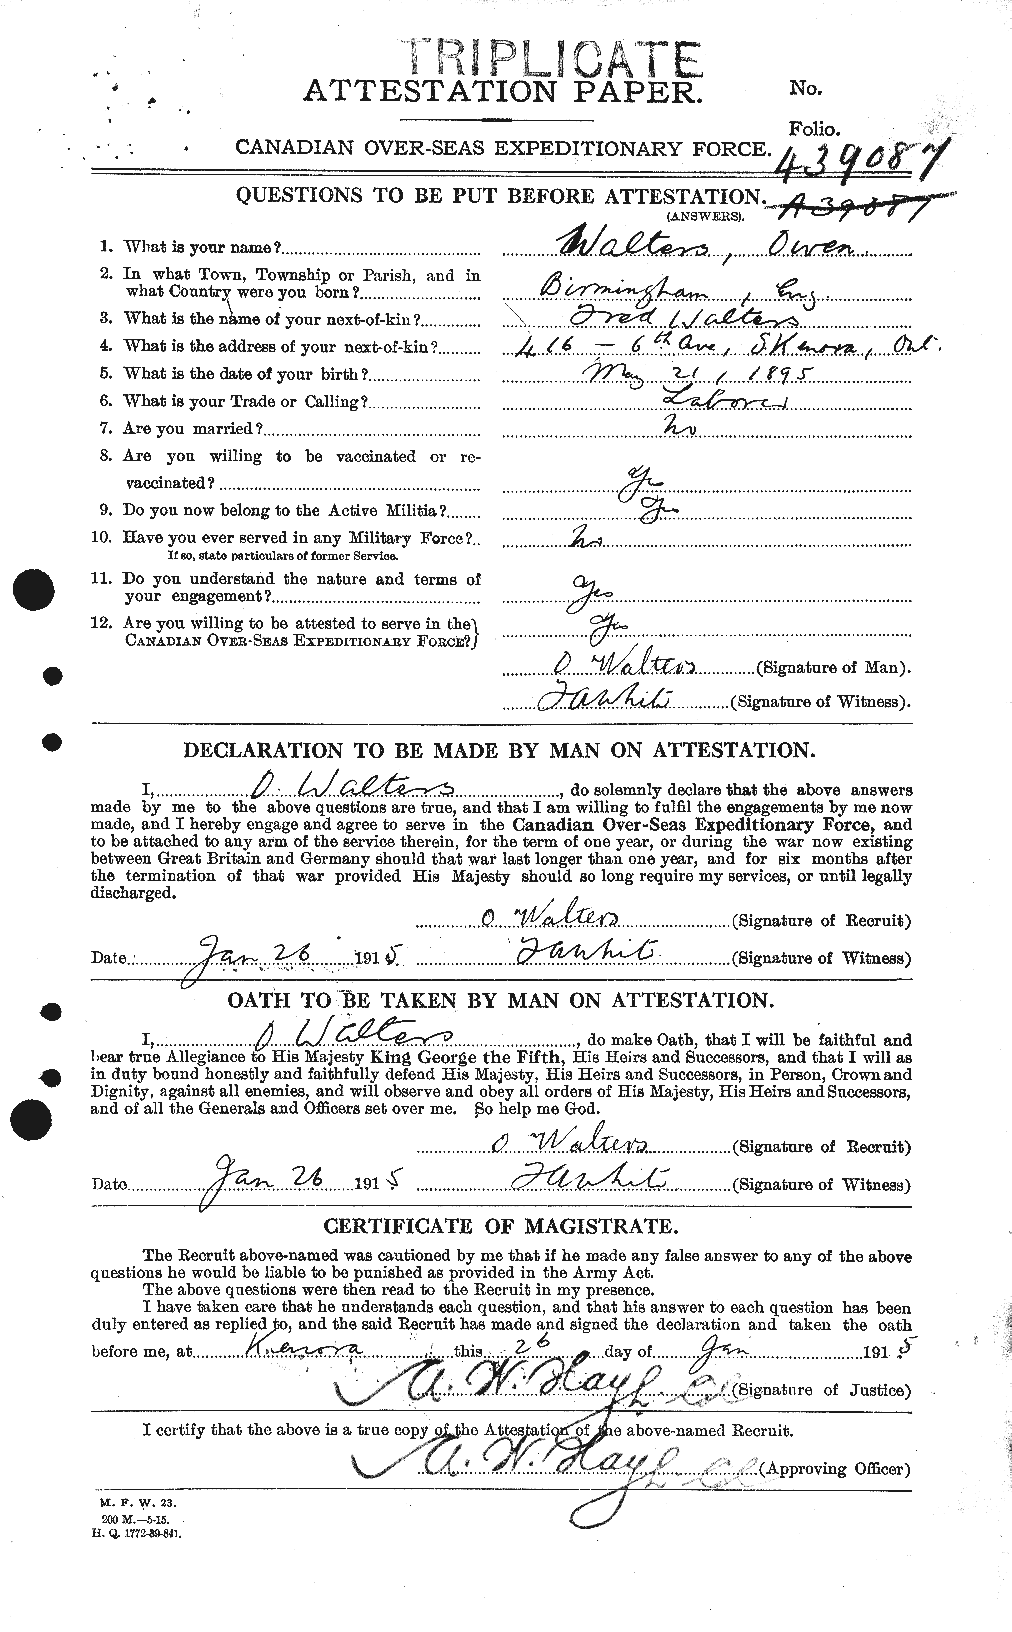 Personnel Records of the First World War - CEF 655423a